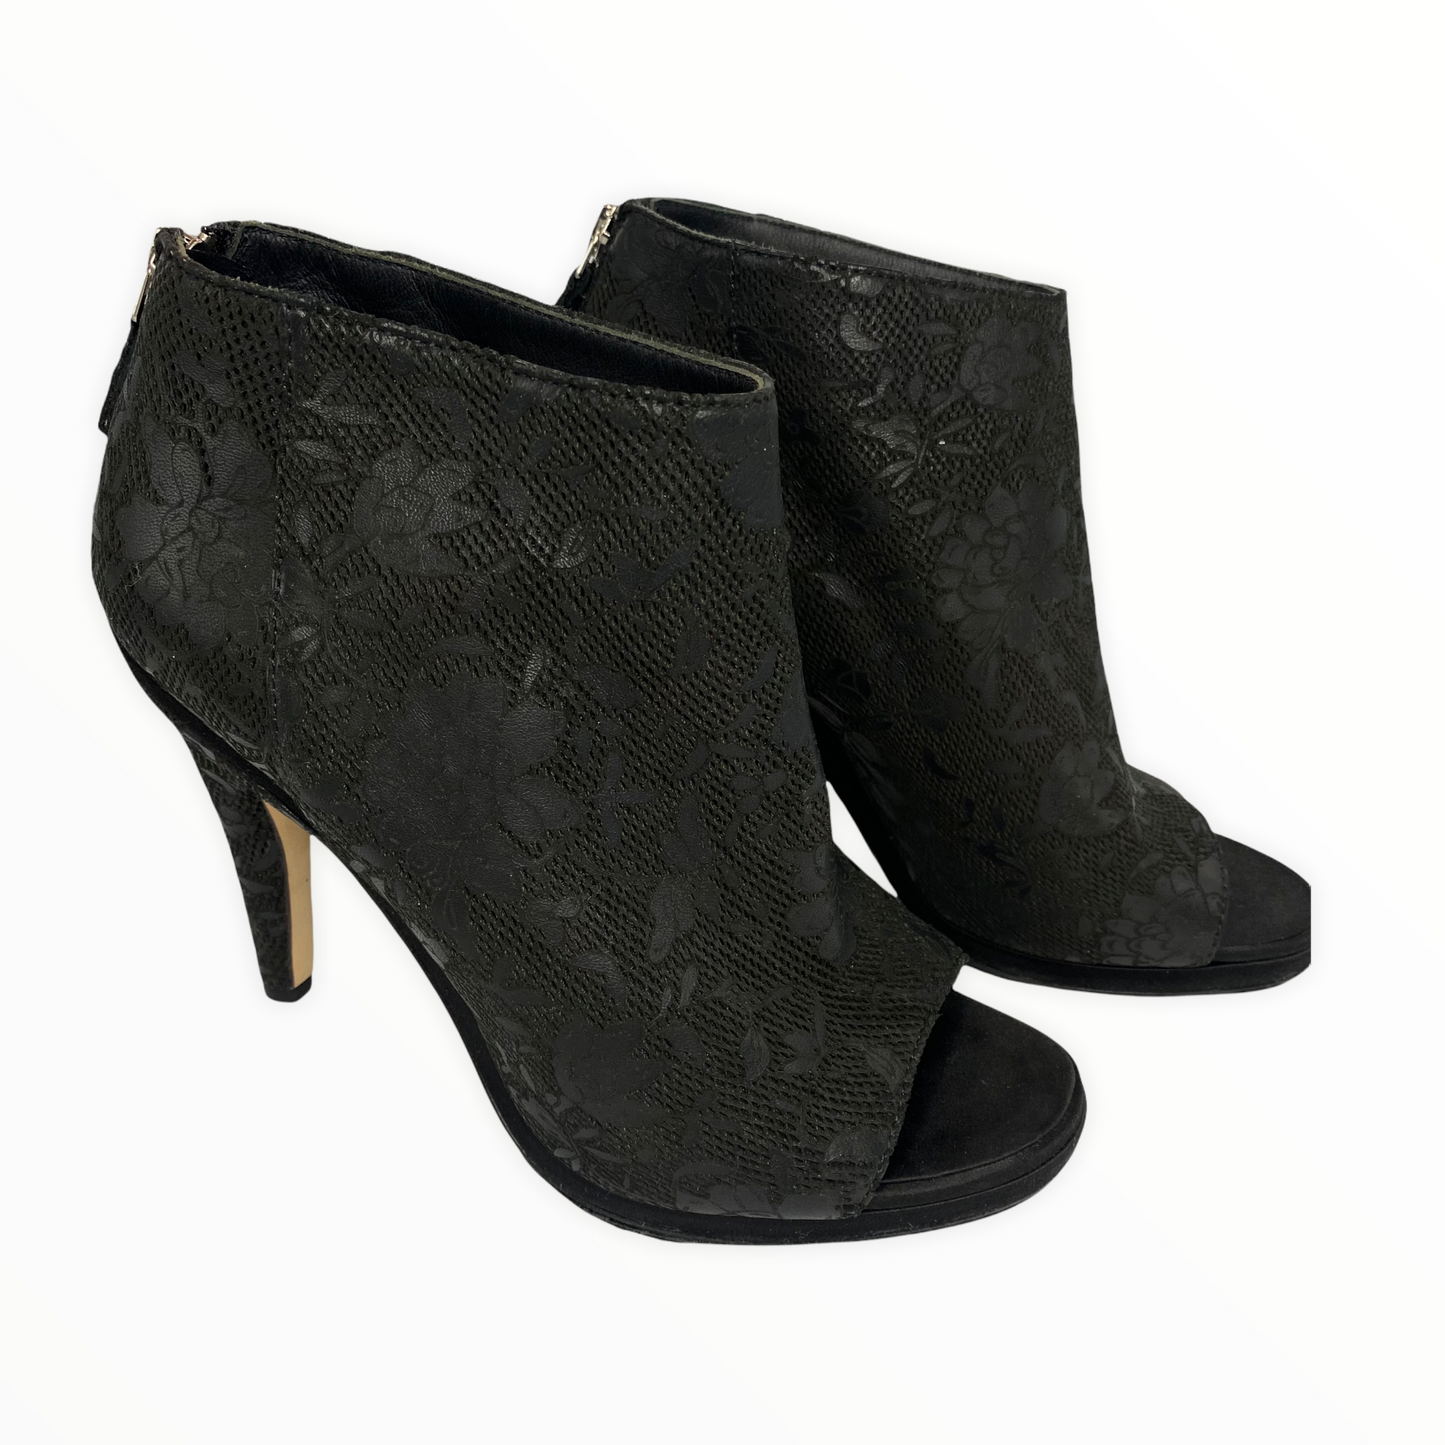 Lysis vintage Chanel open-toe boots - 39 - 2010s